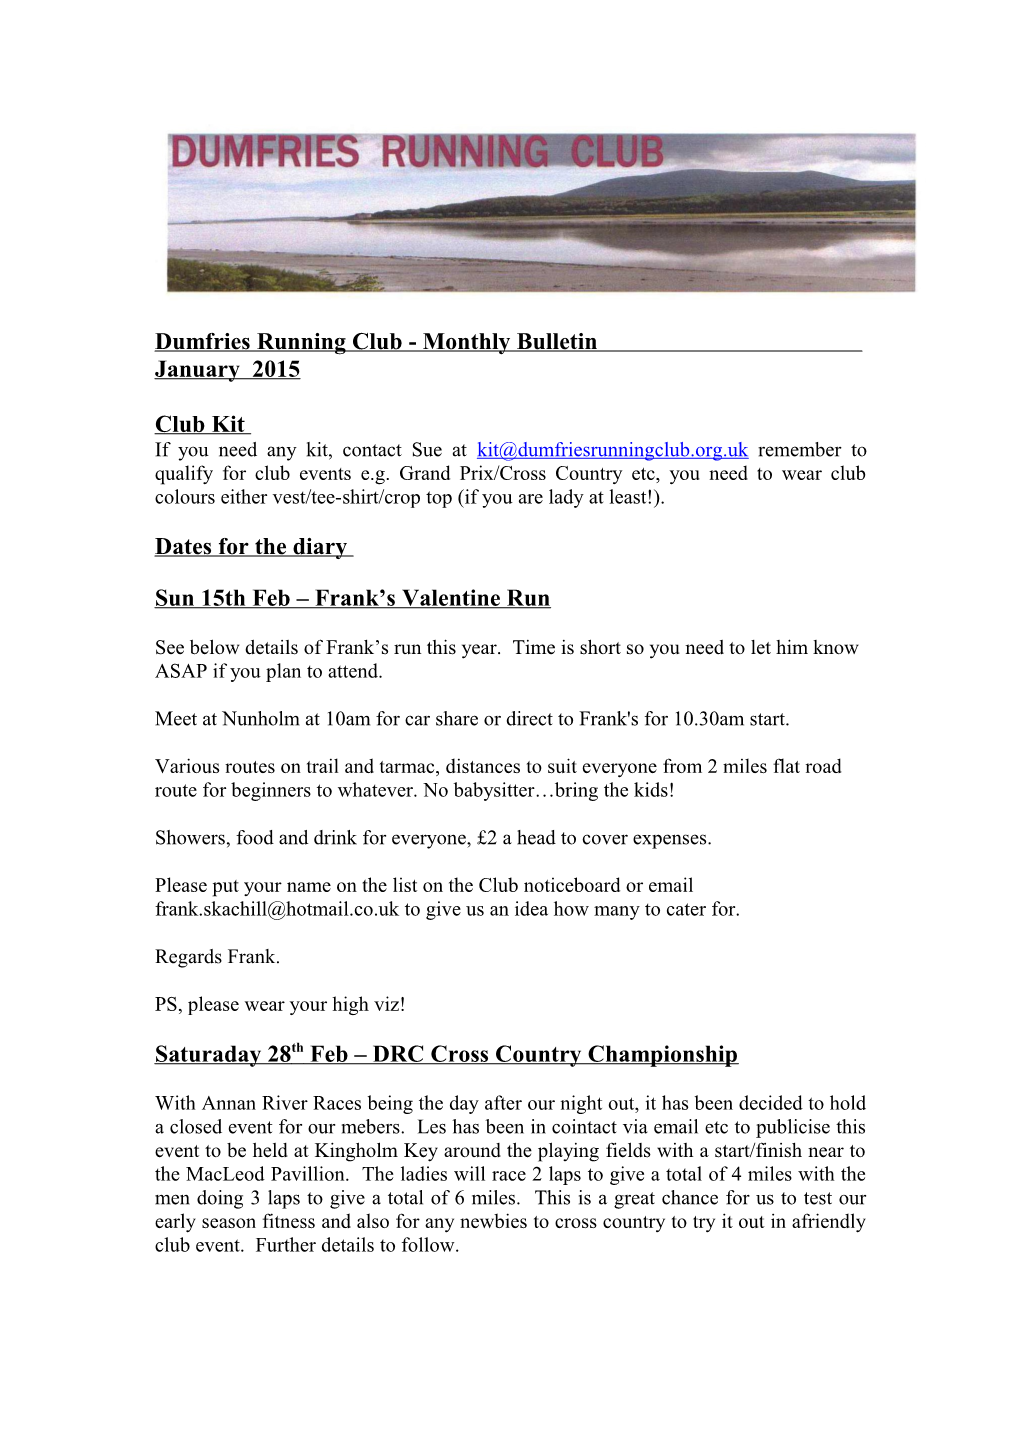 Dumfries Running Club - Monthly Bulletin January 2015